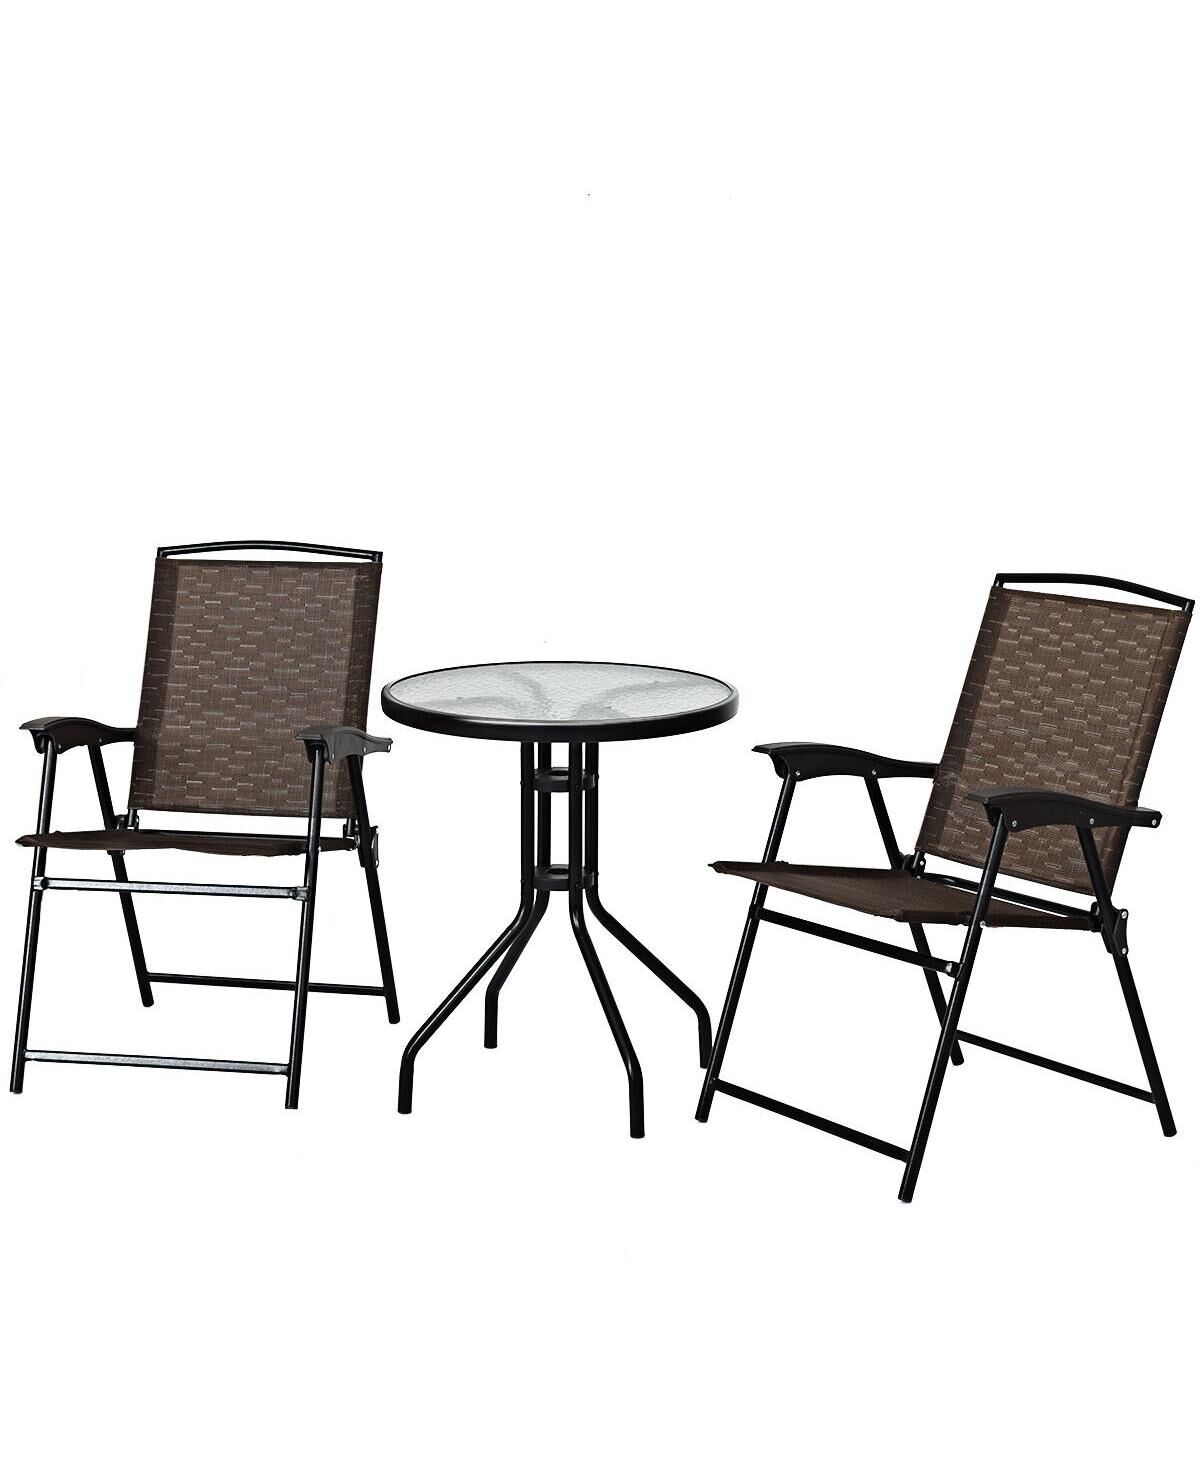 Sugift 3 Pieces Patio Garden Furniture Set of Round Table and Folding Chairs - Black